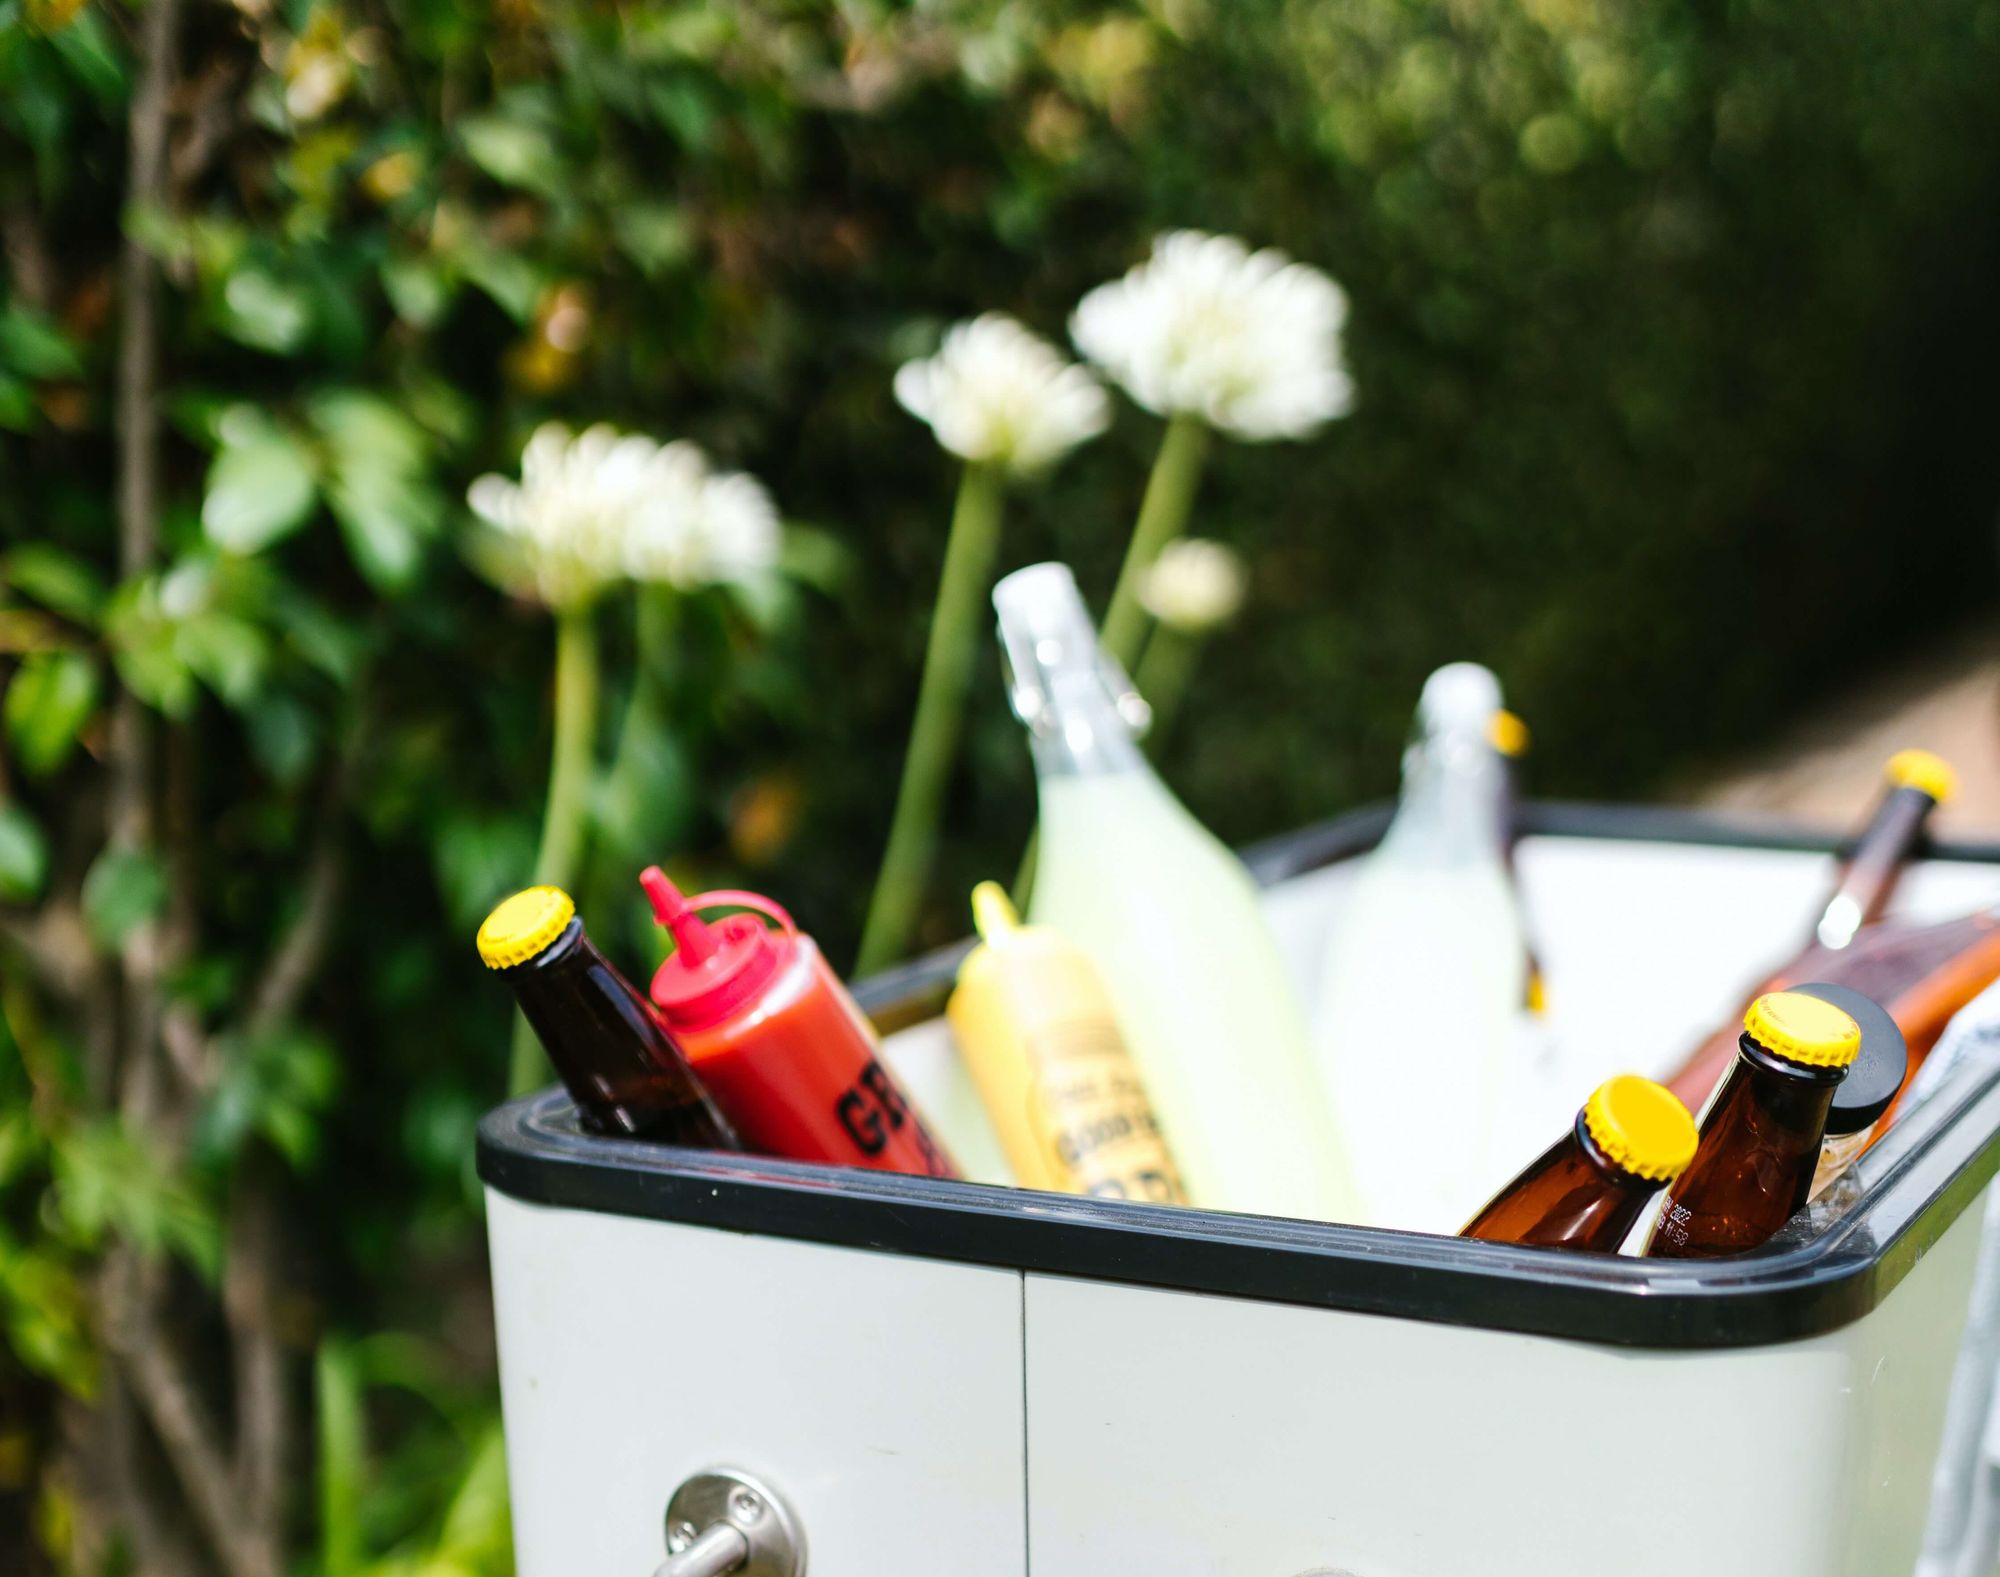 An open cooler outside with various drinks and condiments.